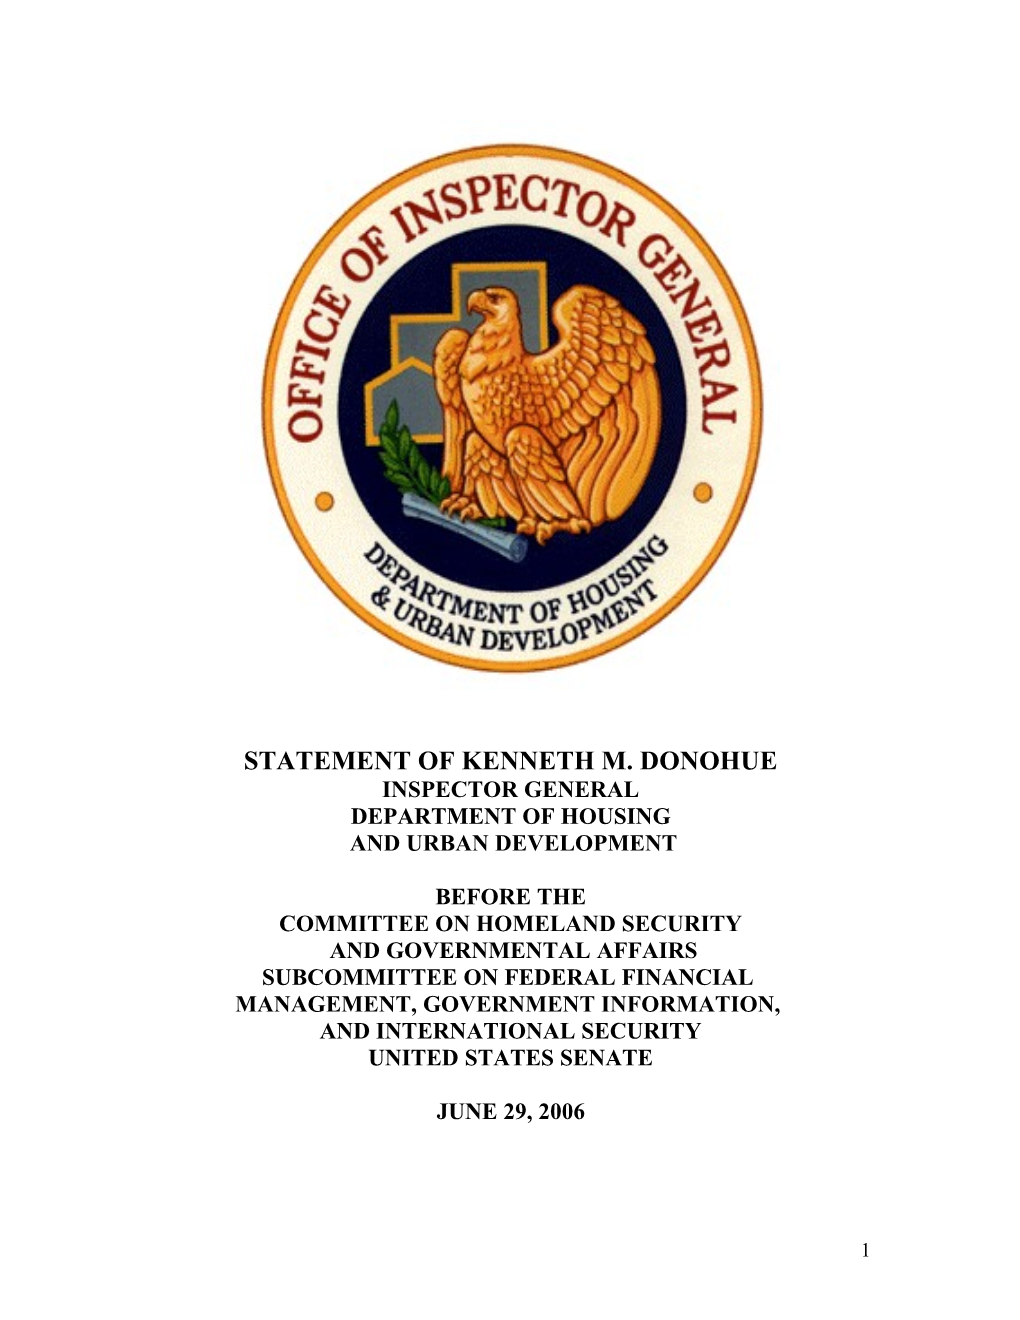 Statement of Kenneth Donohue, Inspector General